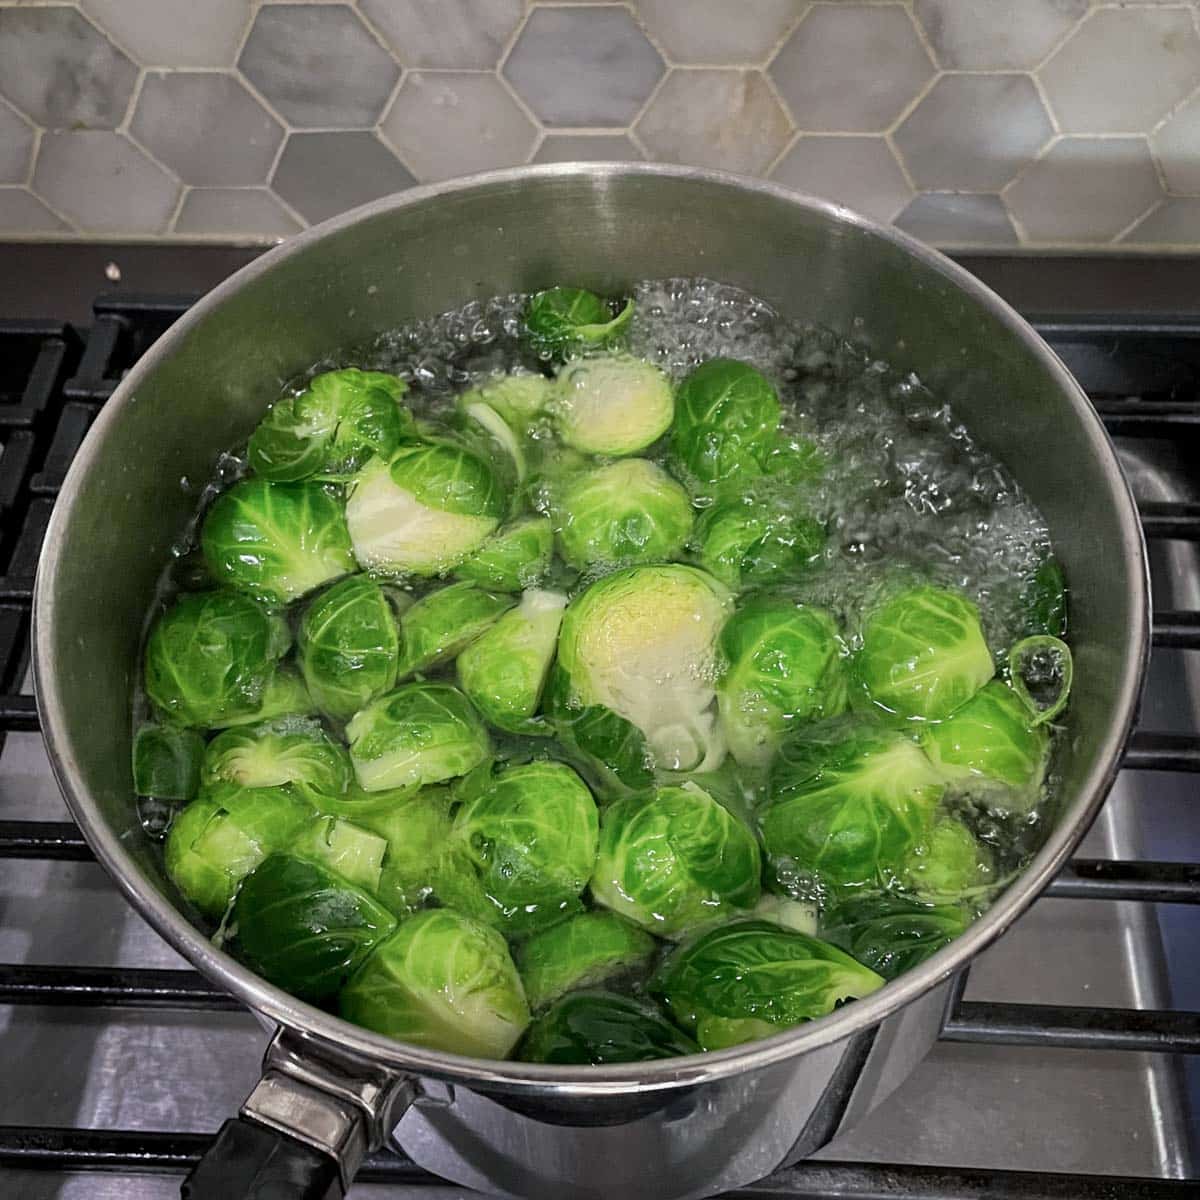 Halved brussels sprouts are blanched in boiling water.